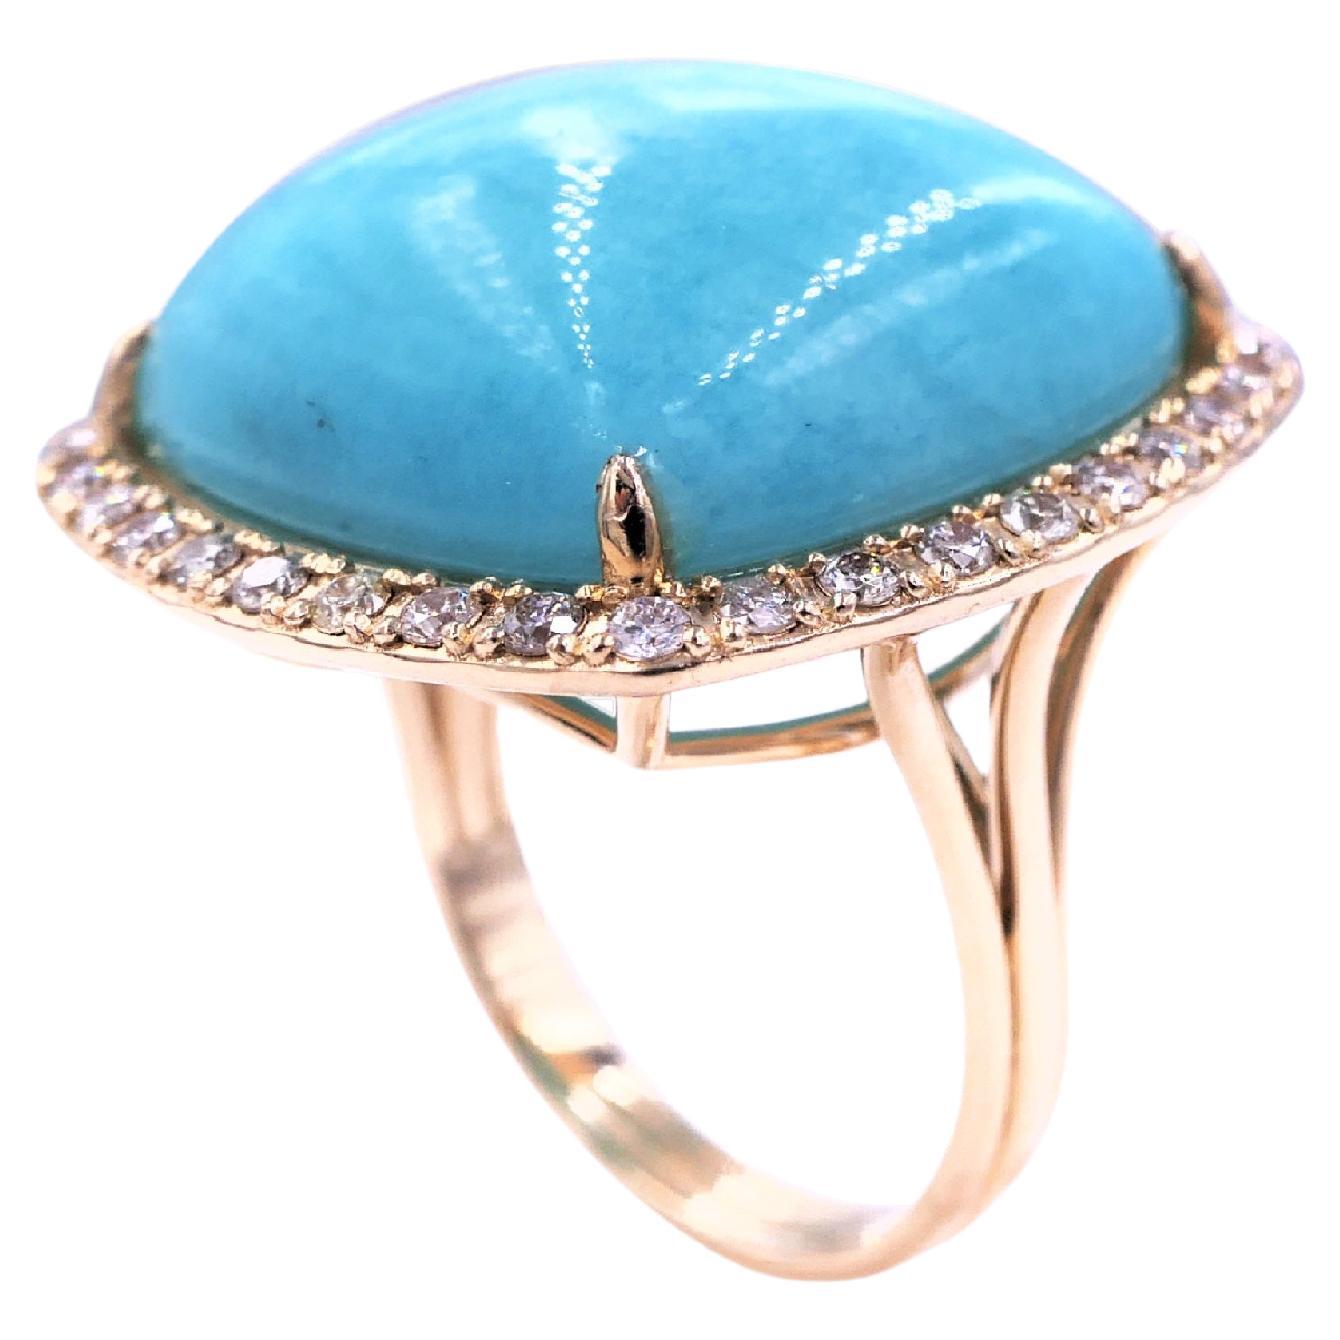 Turquoise Cushion Cabochon Halo Pave Silver Diamonds 14 Karat Yellow Gold Ring
14 Karat Yellow Gold
Turquoise Cushion Cabochon Gemstone
0.50 cts Diamonds
Size 7, Resizable upon request 

Important Information:
Please note that this item will take